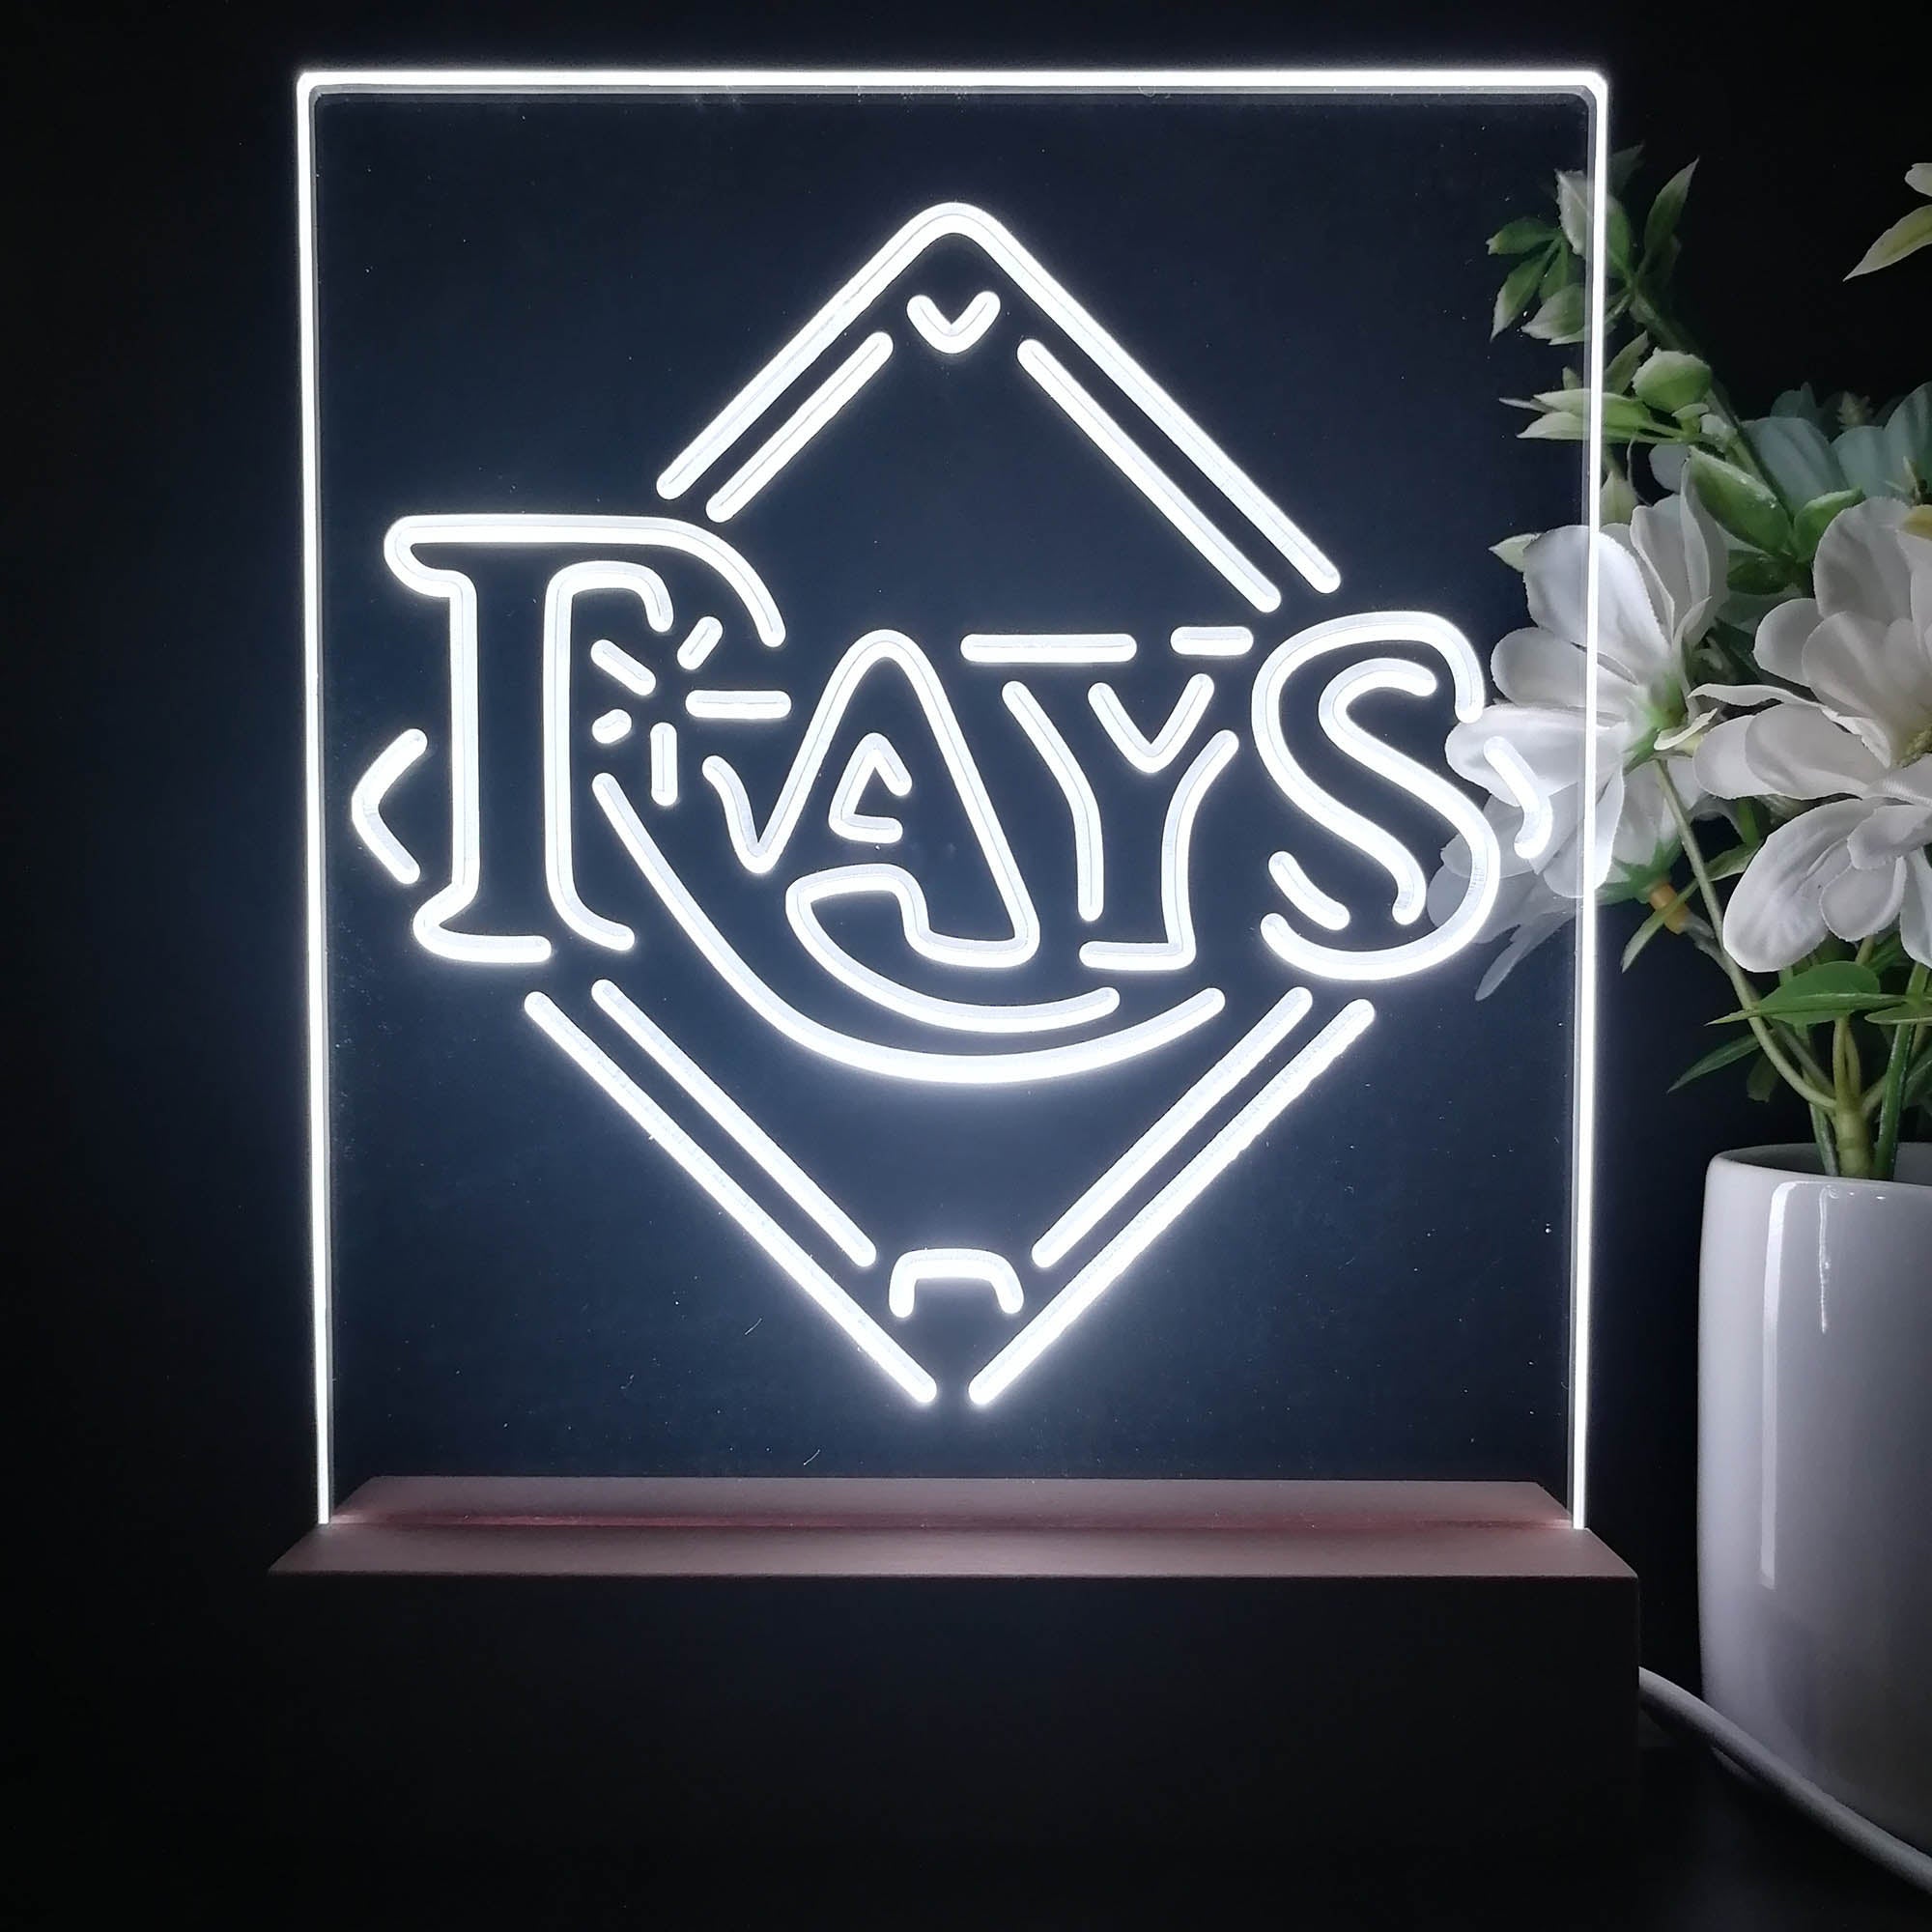 Tampa Bay Rays Neon Sign Table Top Lamp